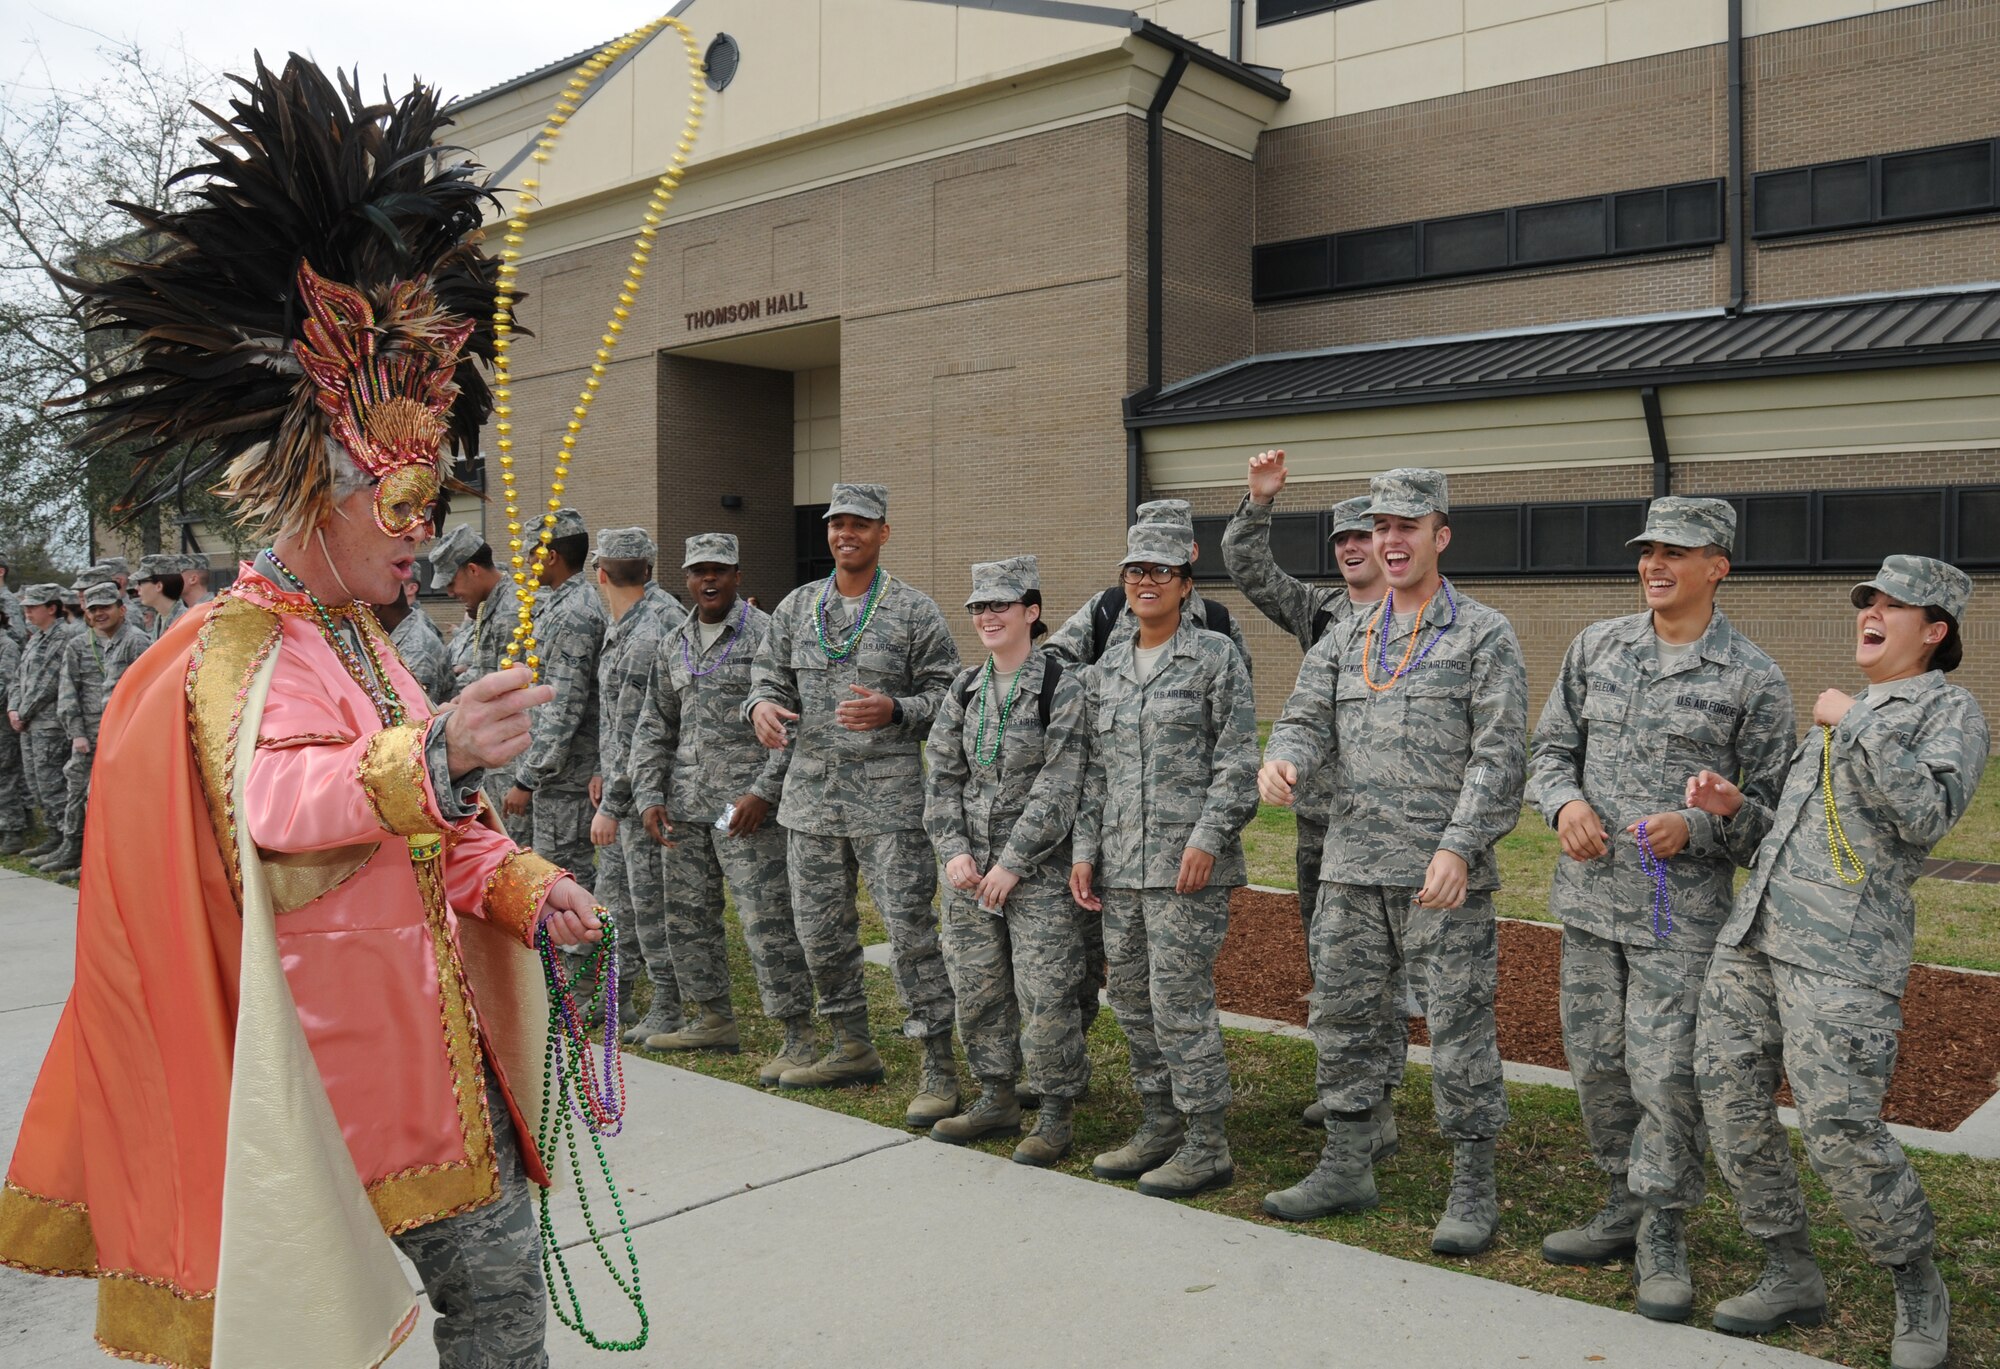 Lt. Col. Brian Worth, 336th Training Squadron commander, teases the crowd with a strand of beads during the 81st Training Group Mardi Gras parade Feb. 10, 2012.  The parade stretched from Thomson Hall to Matero Hall at Keesler Air Force Base, Biloxi, Miss.   (U.S. Air Force photo by Kemberly Groue)